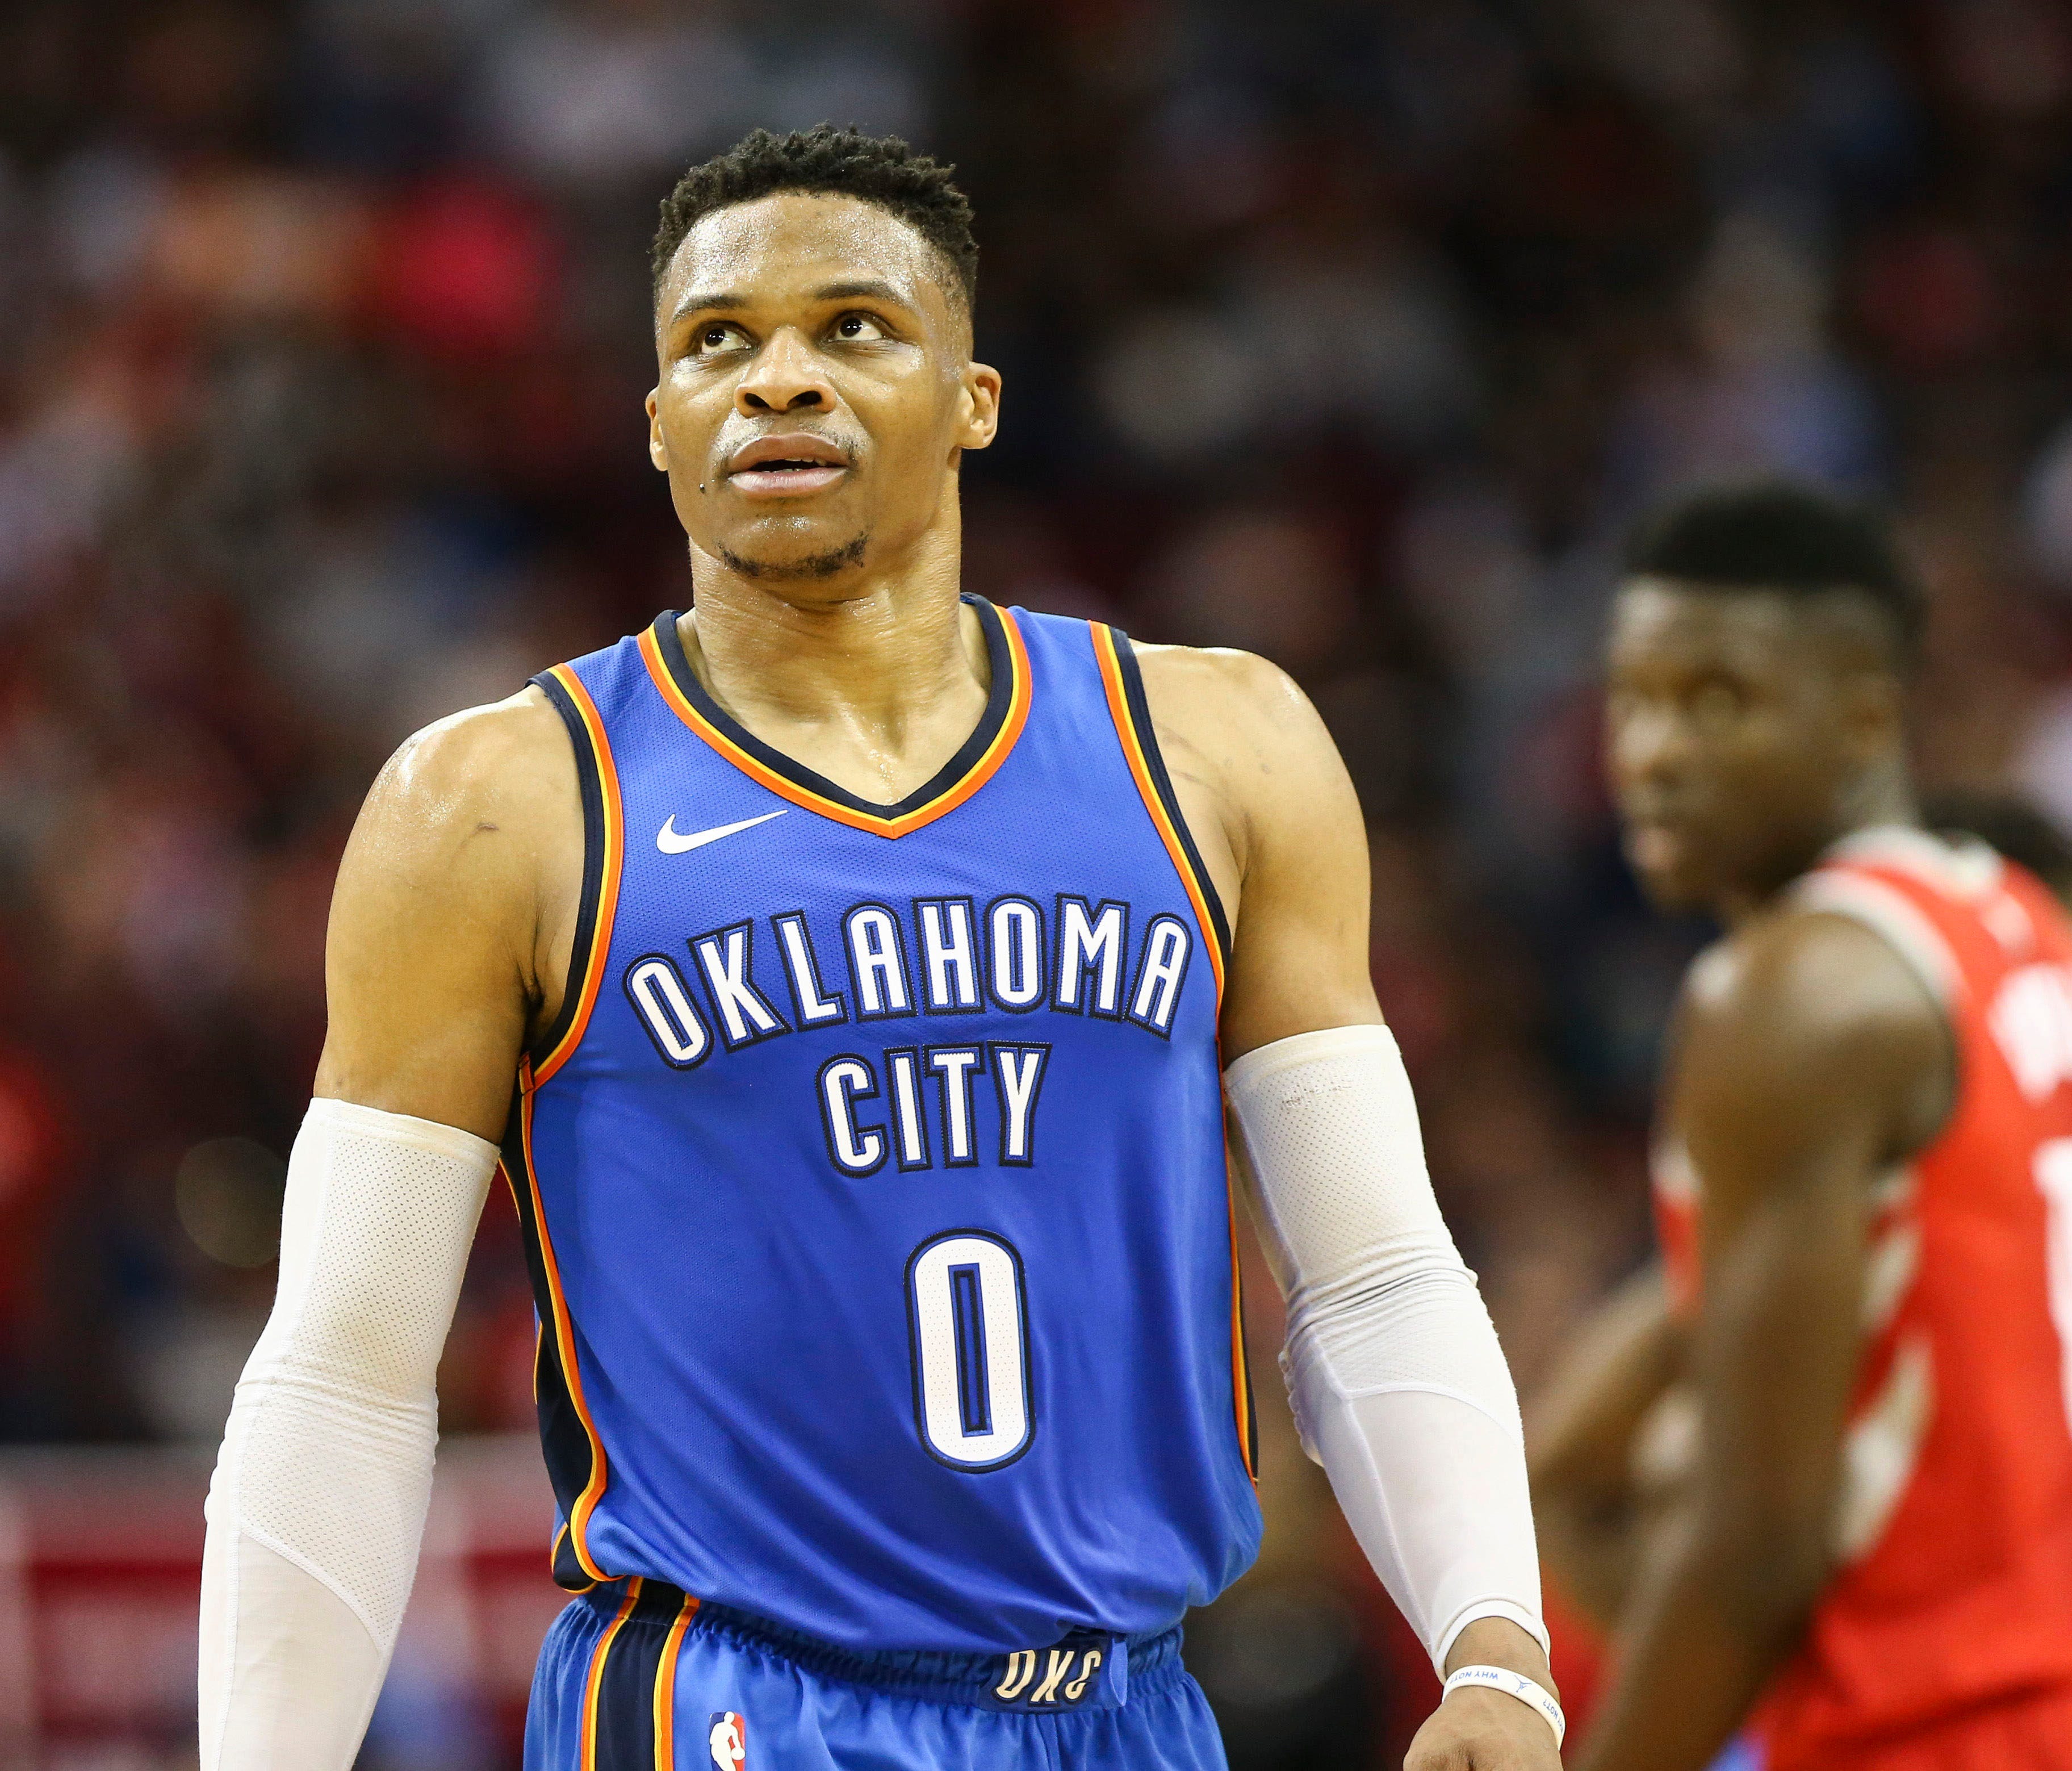 Oklahoma City Thunder guard Russell Westbrook looks up after a play during the first half against the Houston Rockets at Toyota Center.